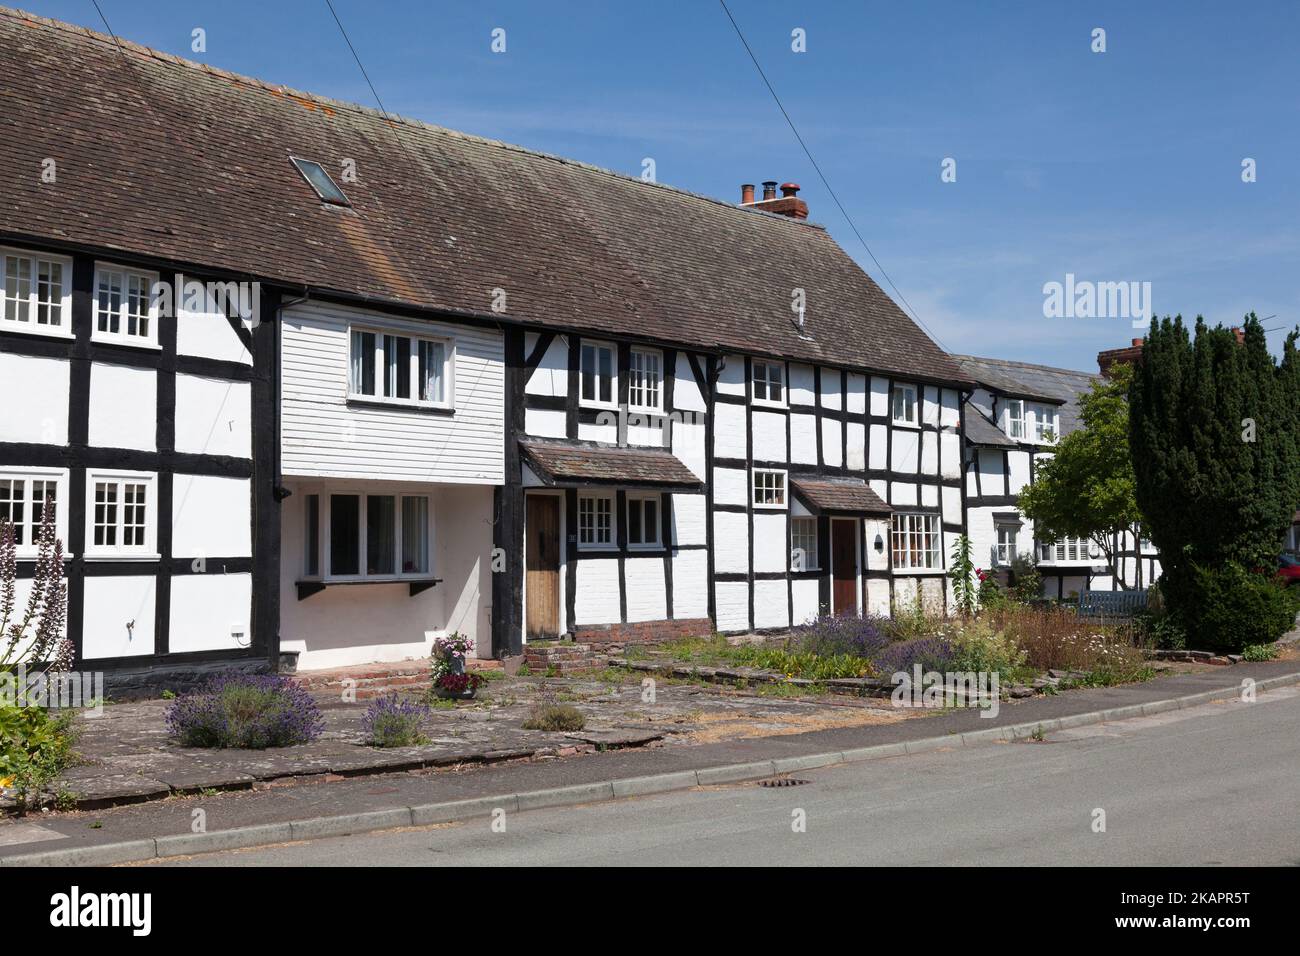 Historic half-timbered houses, Dilwyn, Herefordshire Stock Photo